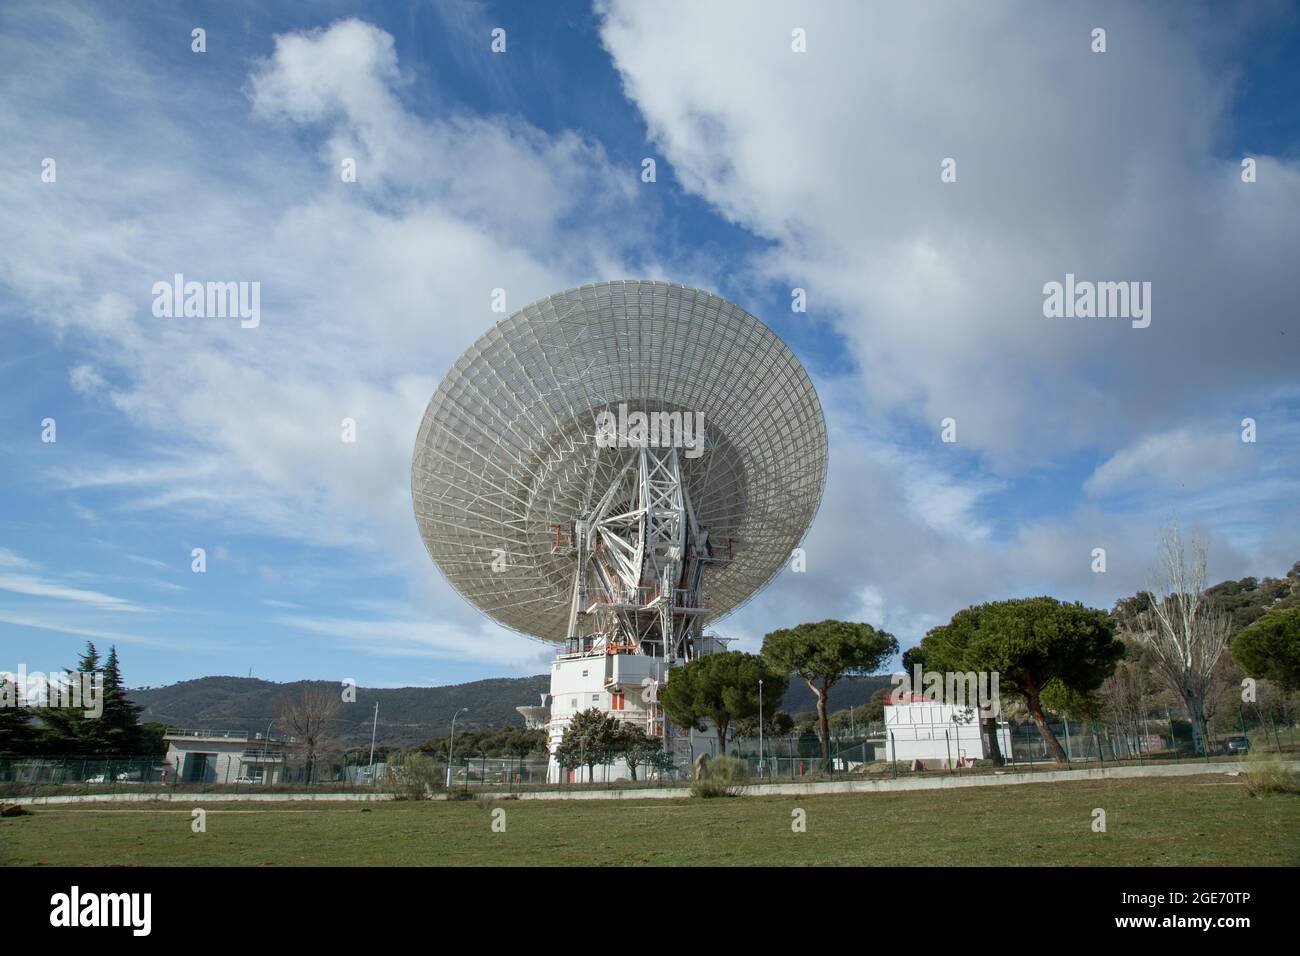 Giant radio telescopes located in valley between mountains with blue sky and clouds Stock Photo